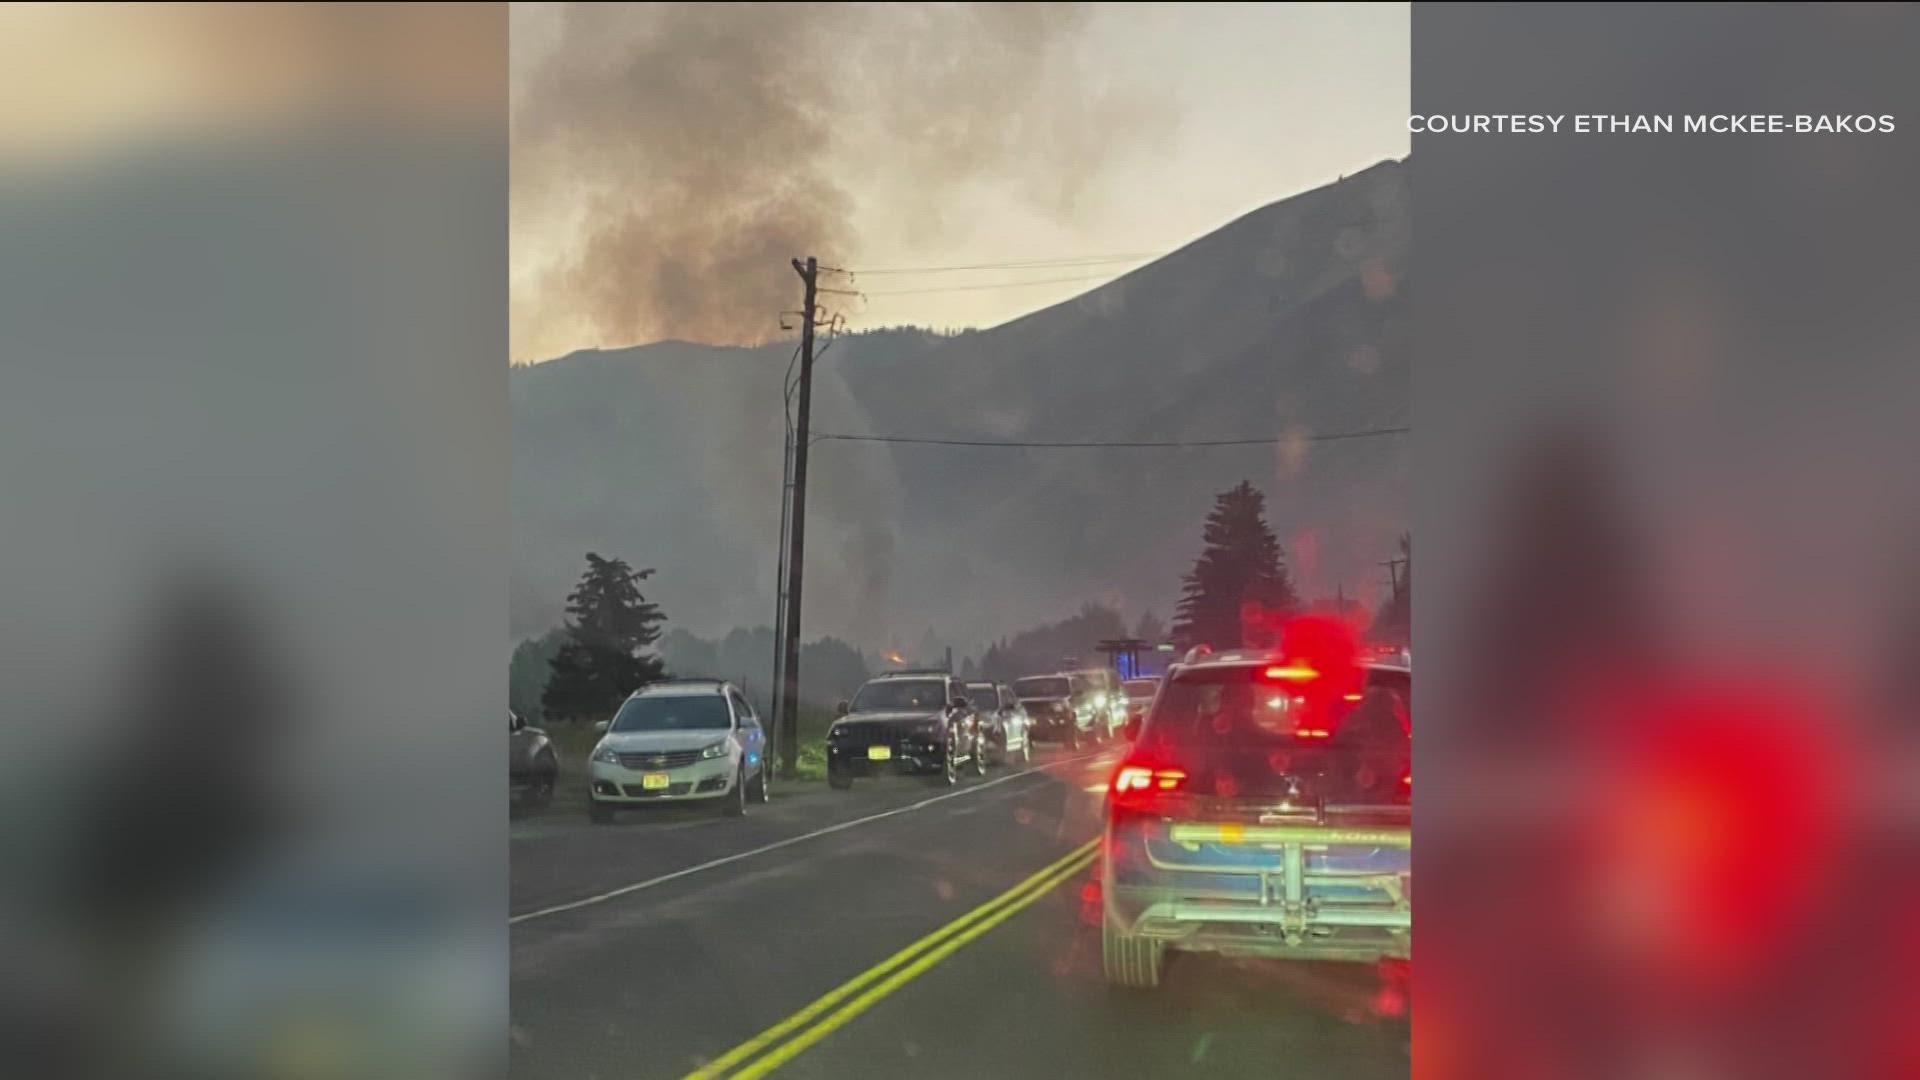 Saturday evening, 26 homes were lost after a structure fire broke out at Limelight Condominium in Ketchum. Officials are reporting no human casualties.